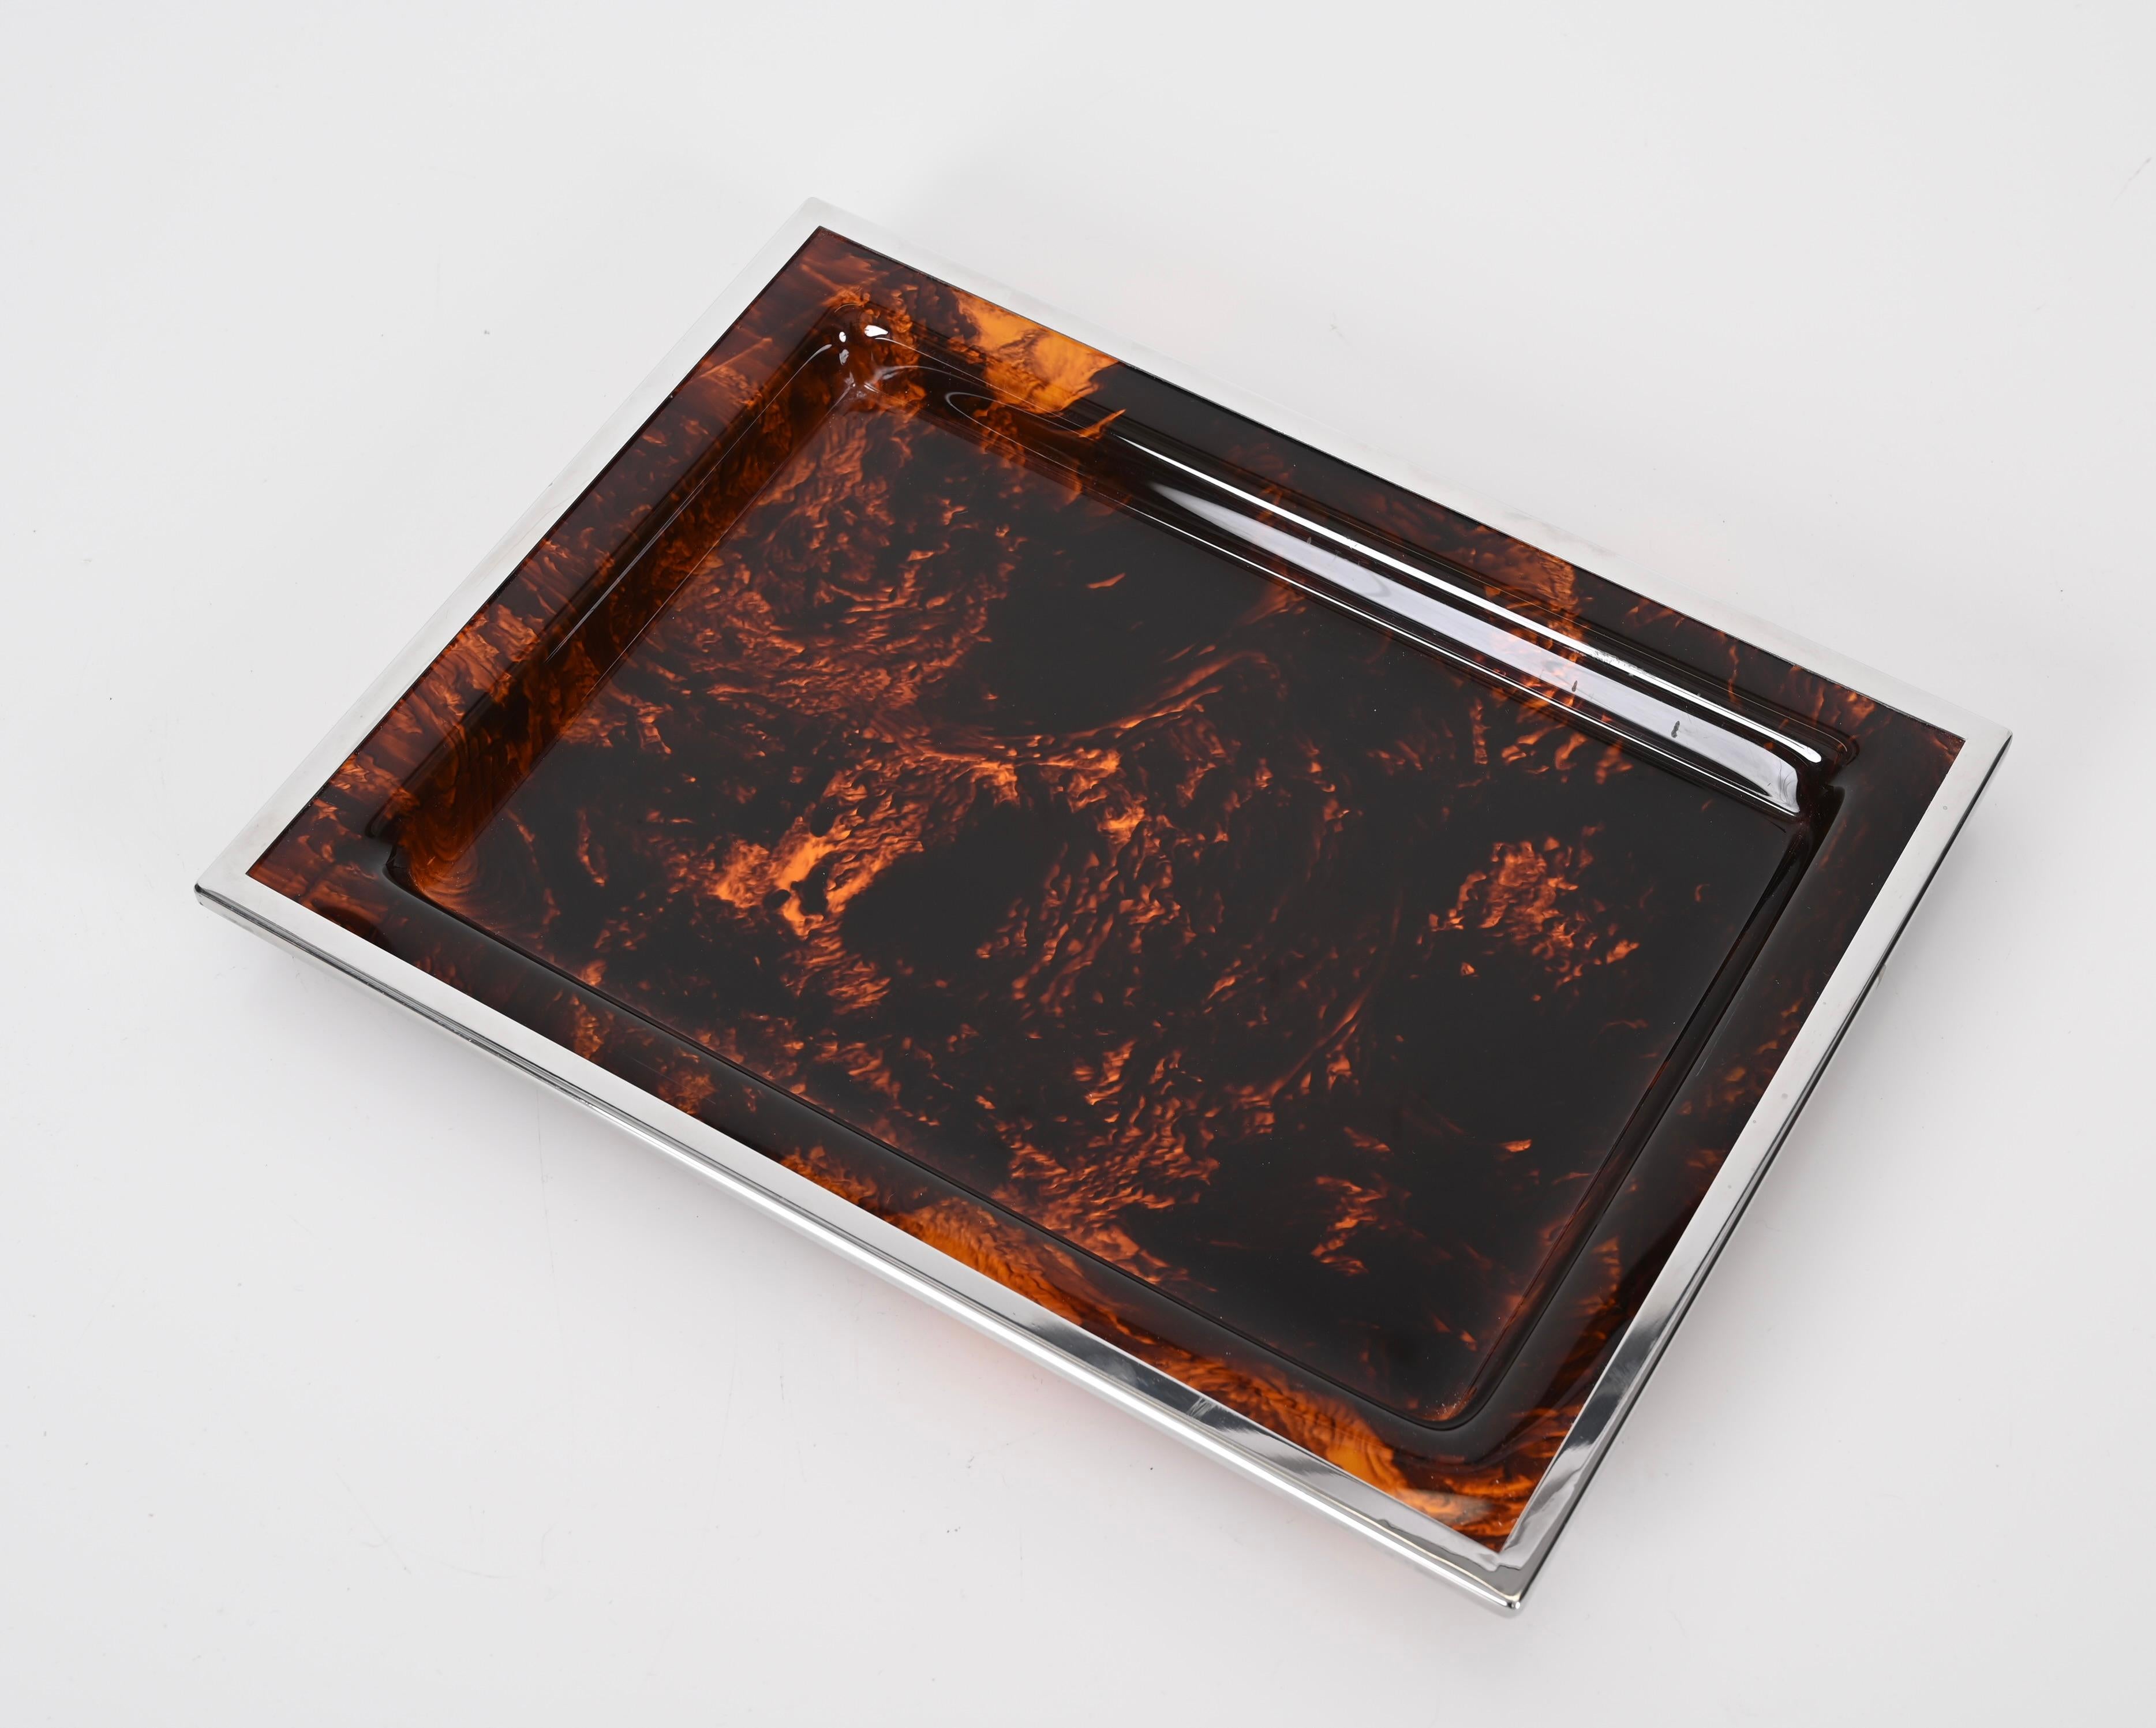 Christian Dior Tortoiseshell Effect Lucite and Chrome Serving Tray, Italy 1970s For Sale 4